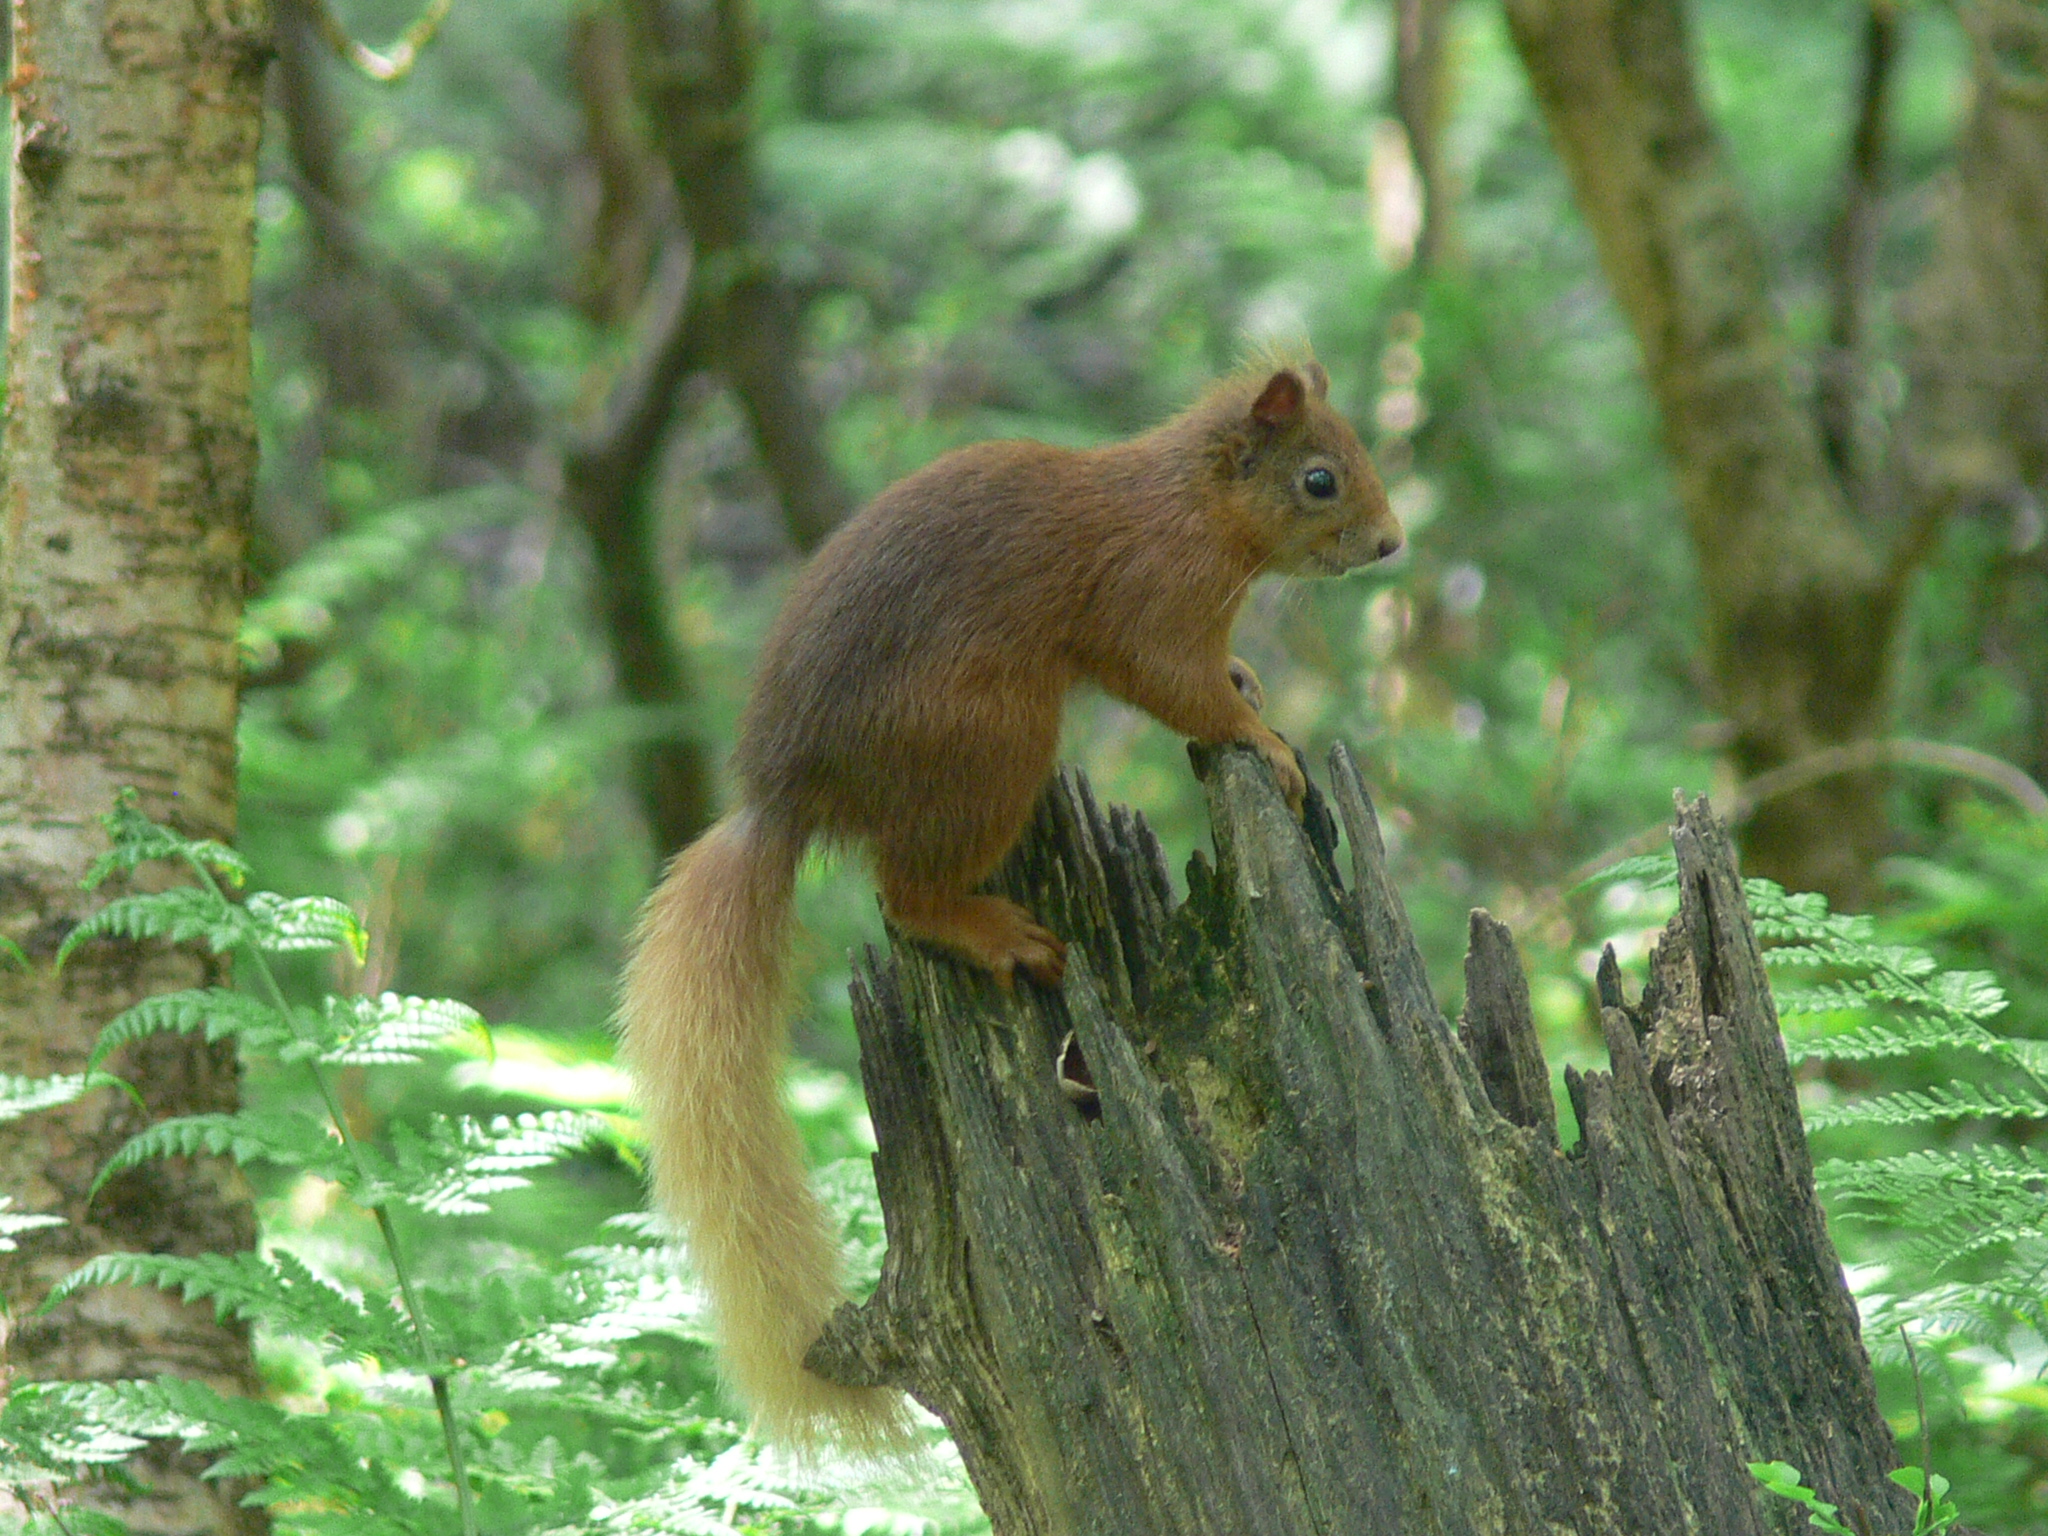 Red Squirrel on Tree Trunk - August 2014